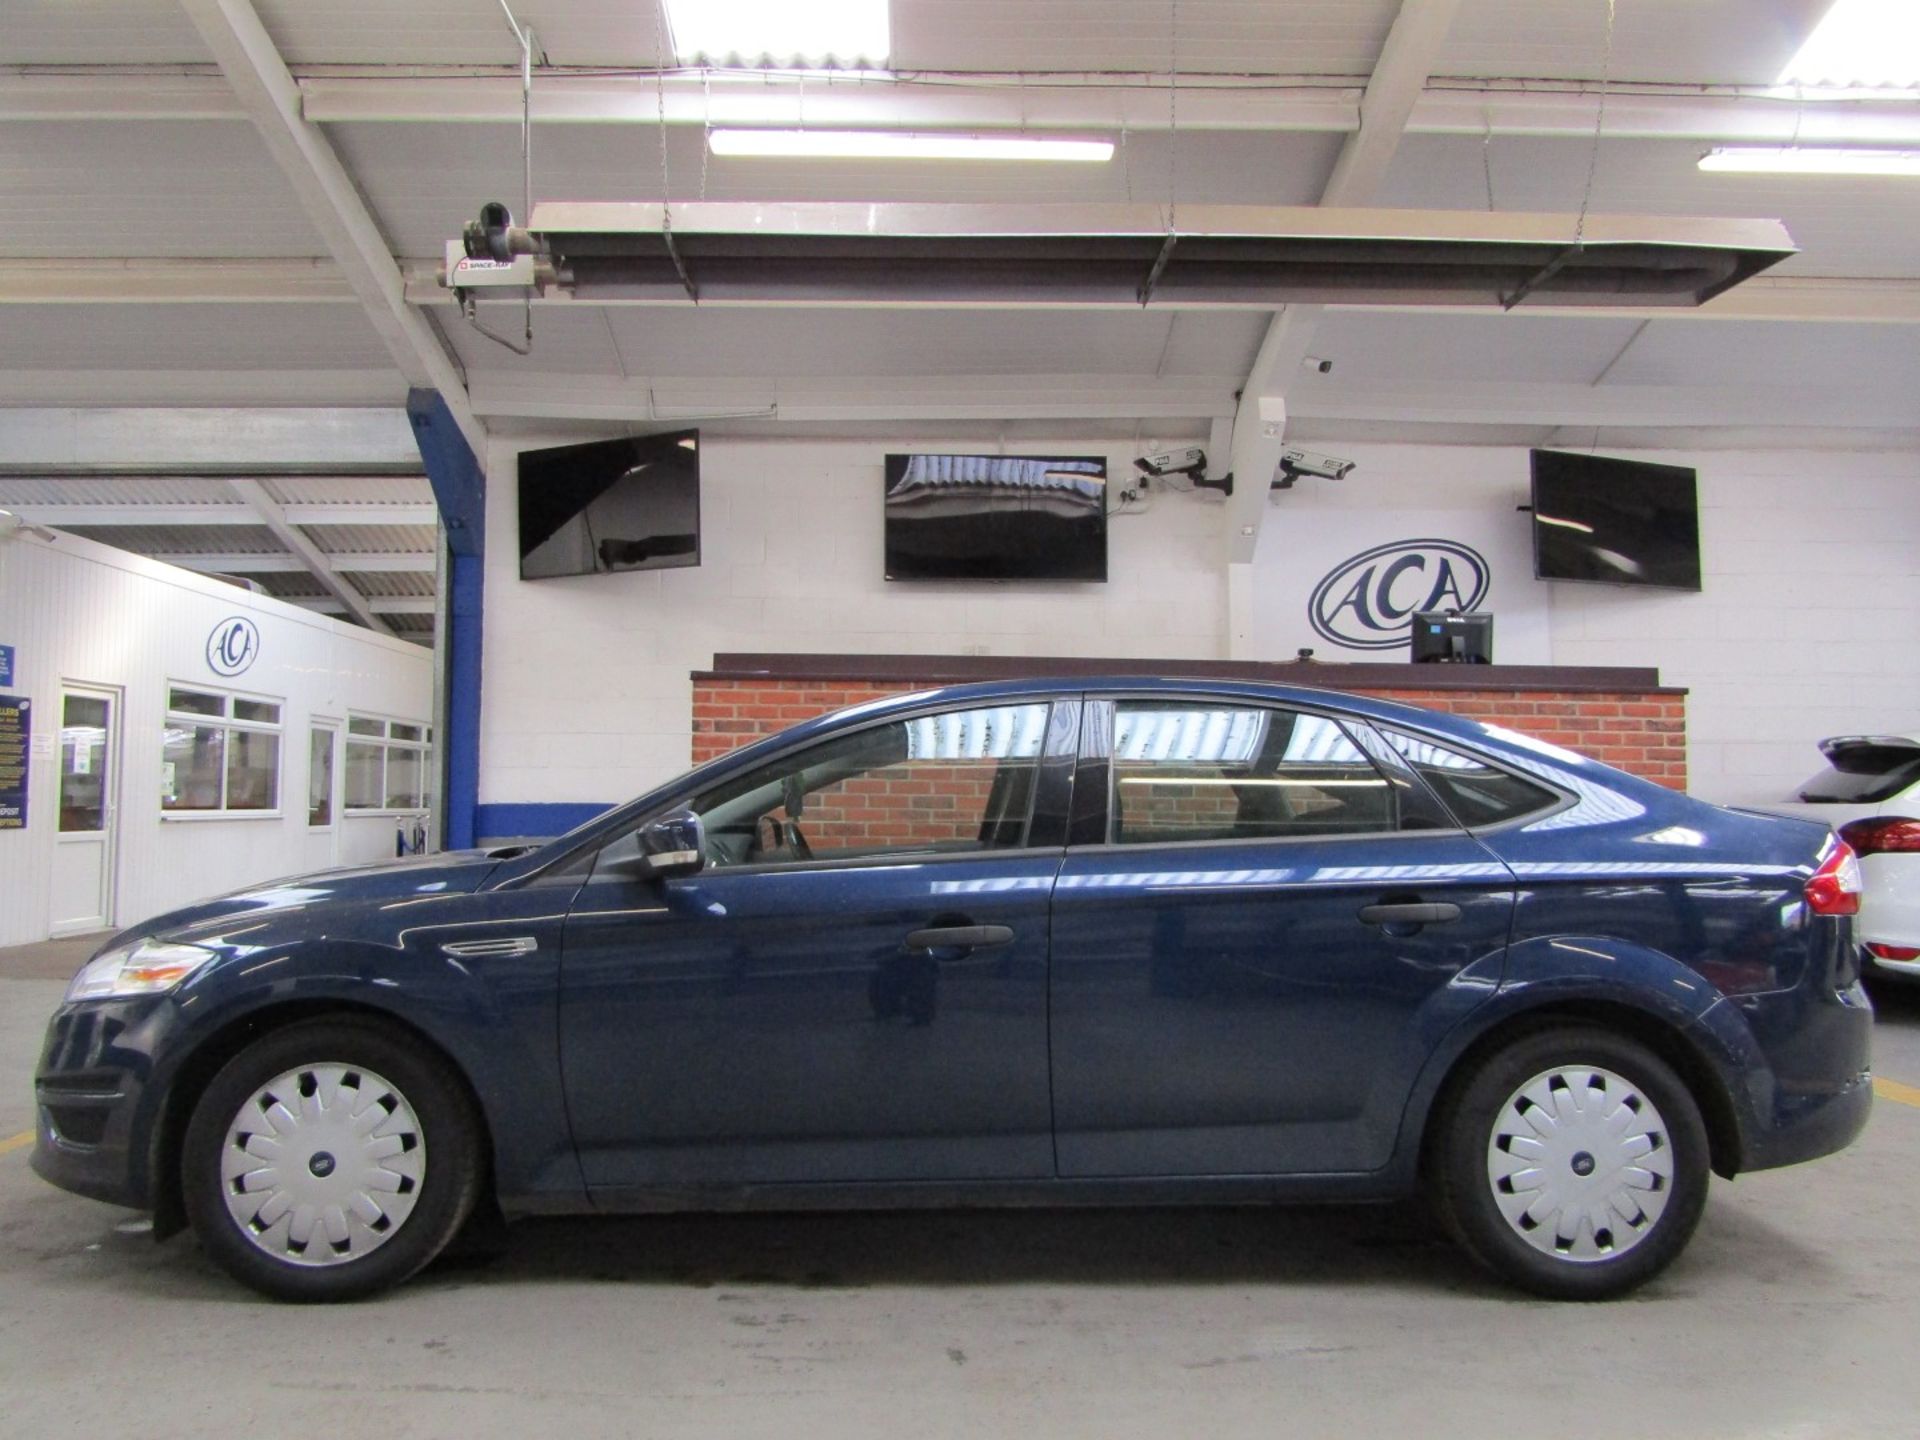 62 12 Ford Mondeo Edge TDCI - Image 18 of 19